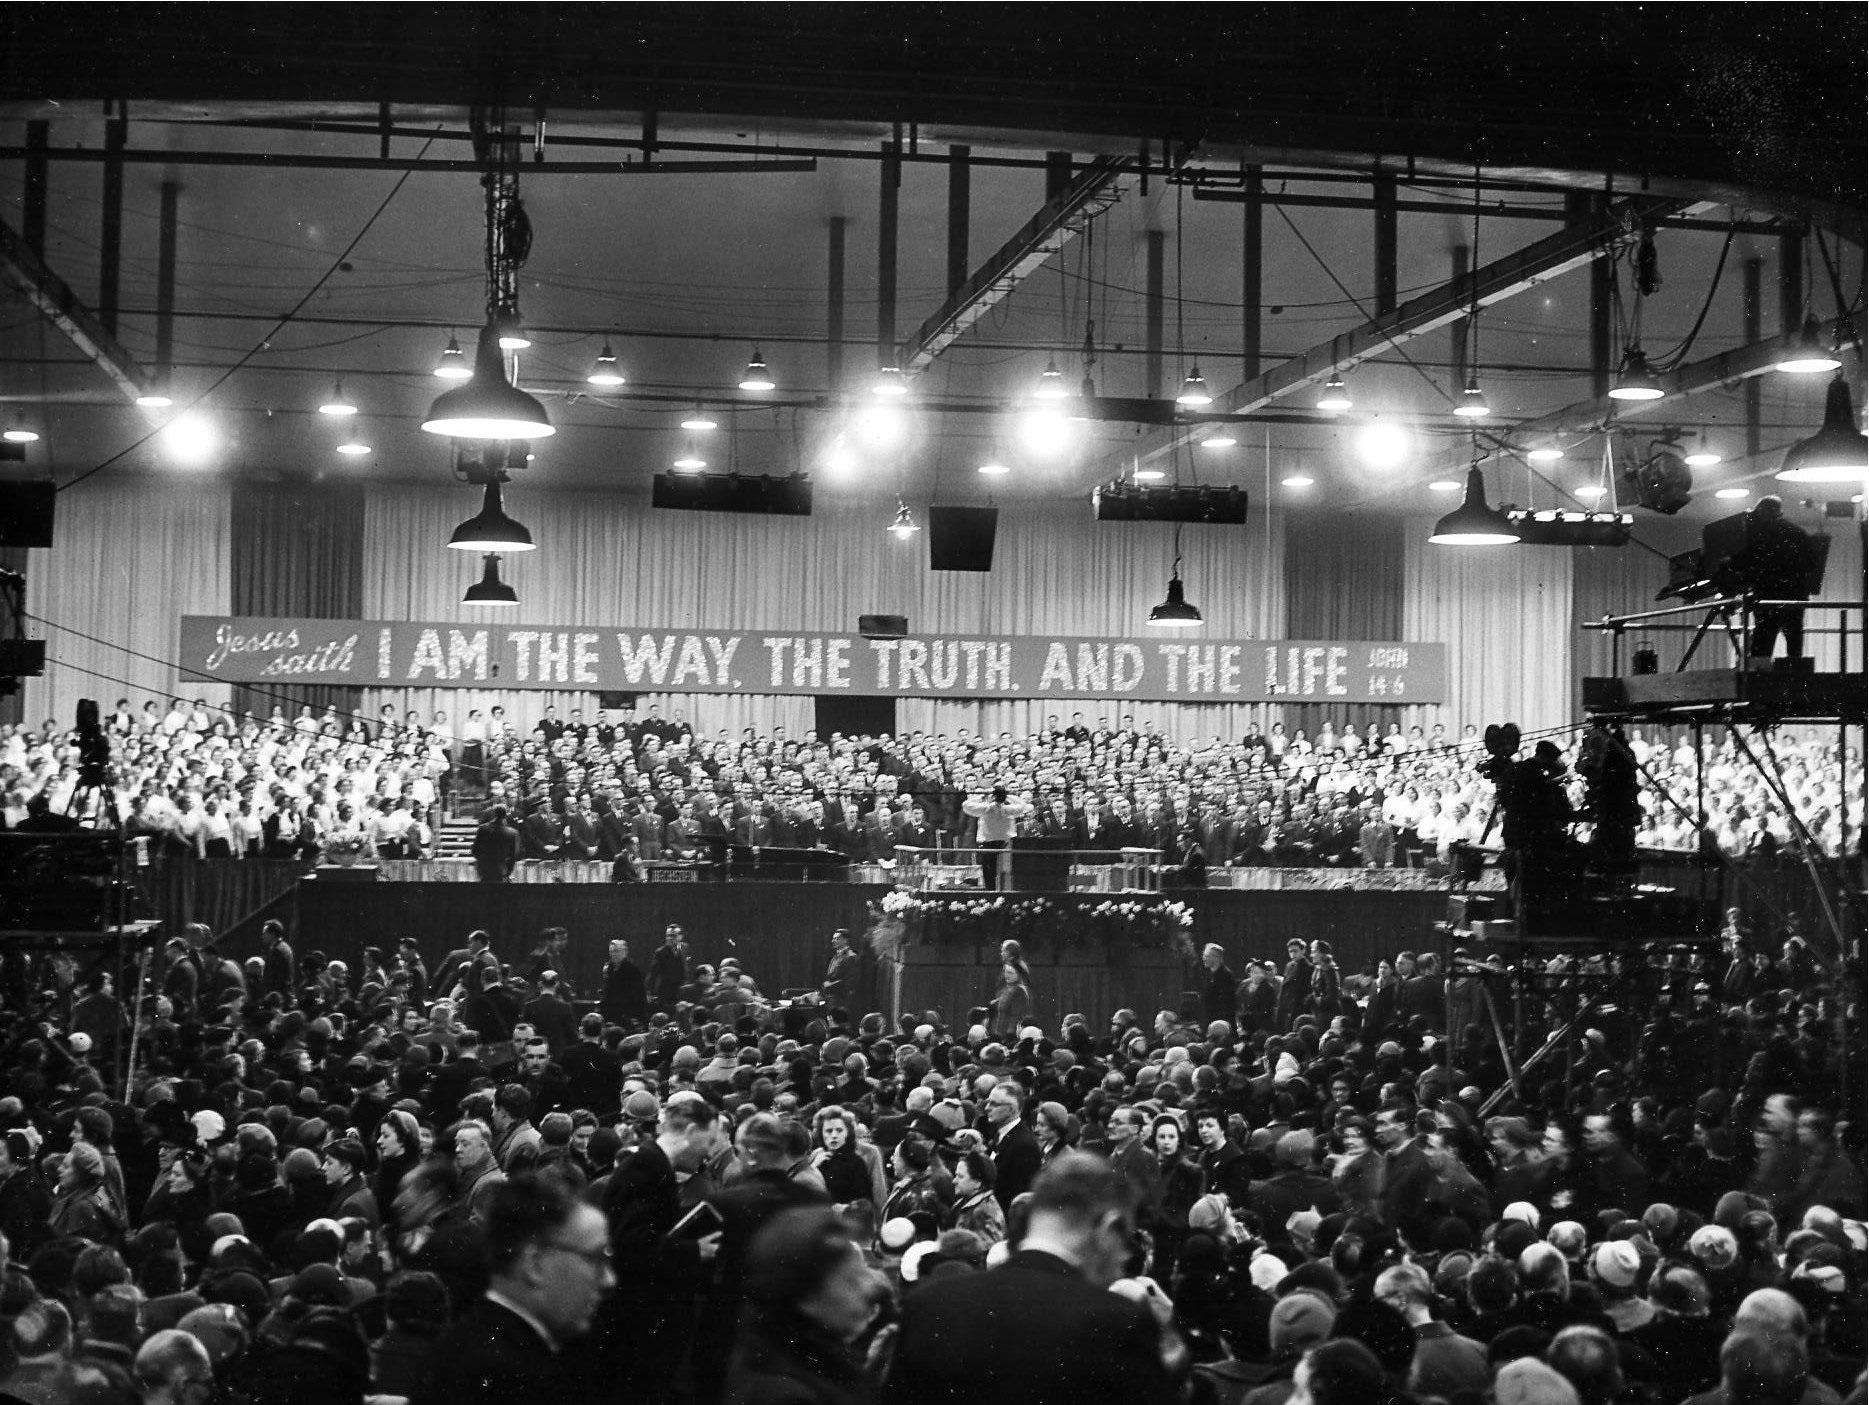 When Glasgow played host to Billy Graham - and 100,000 turned up to hear him preach